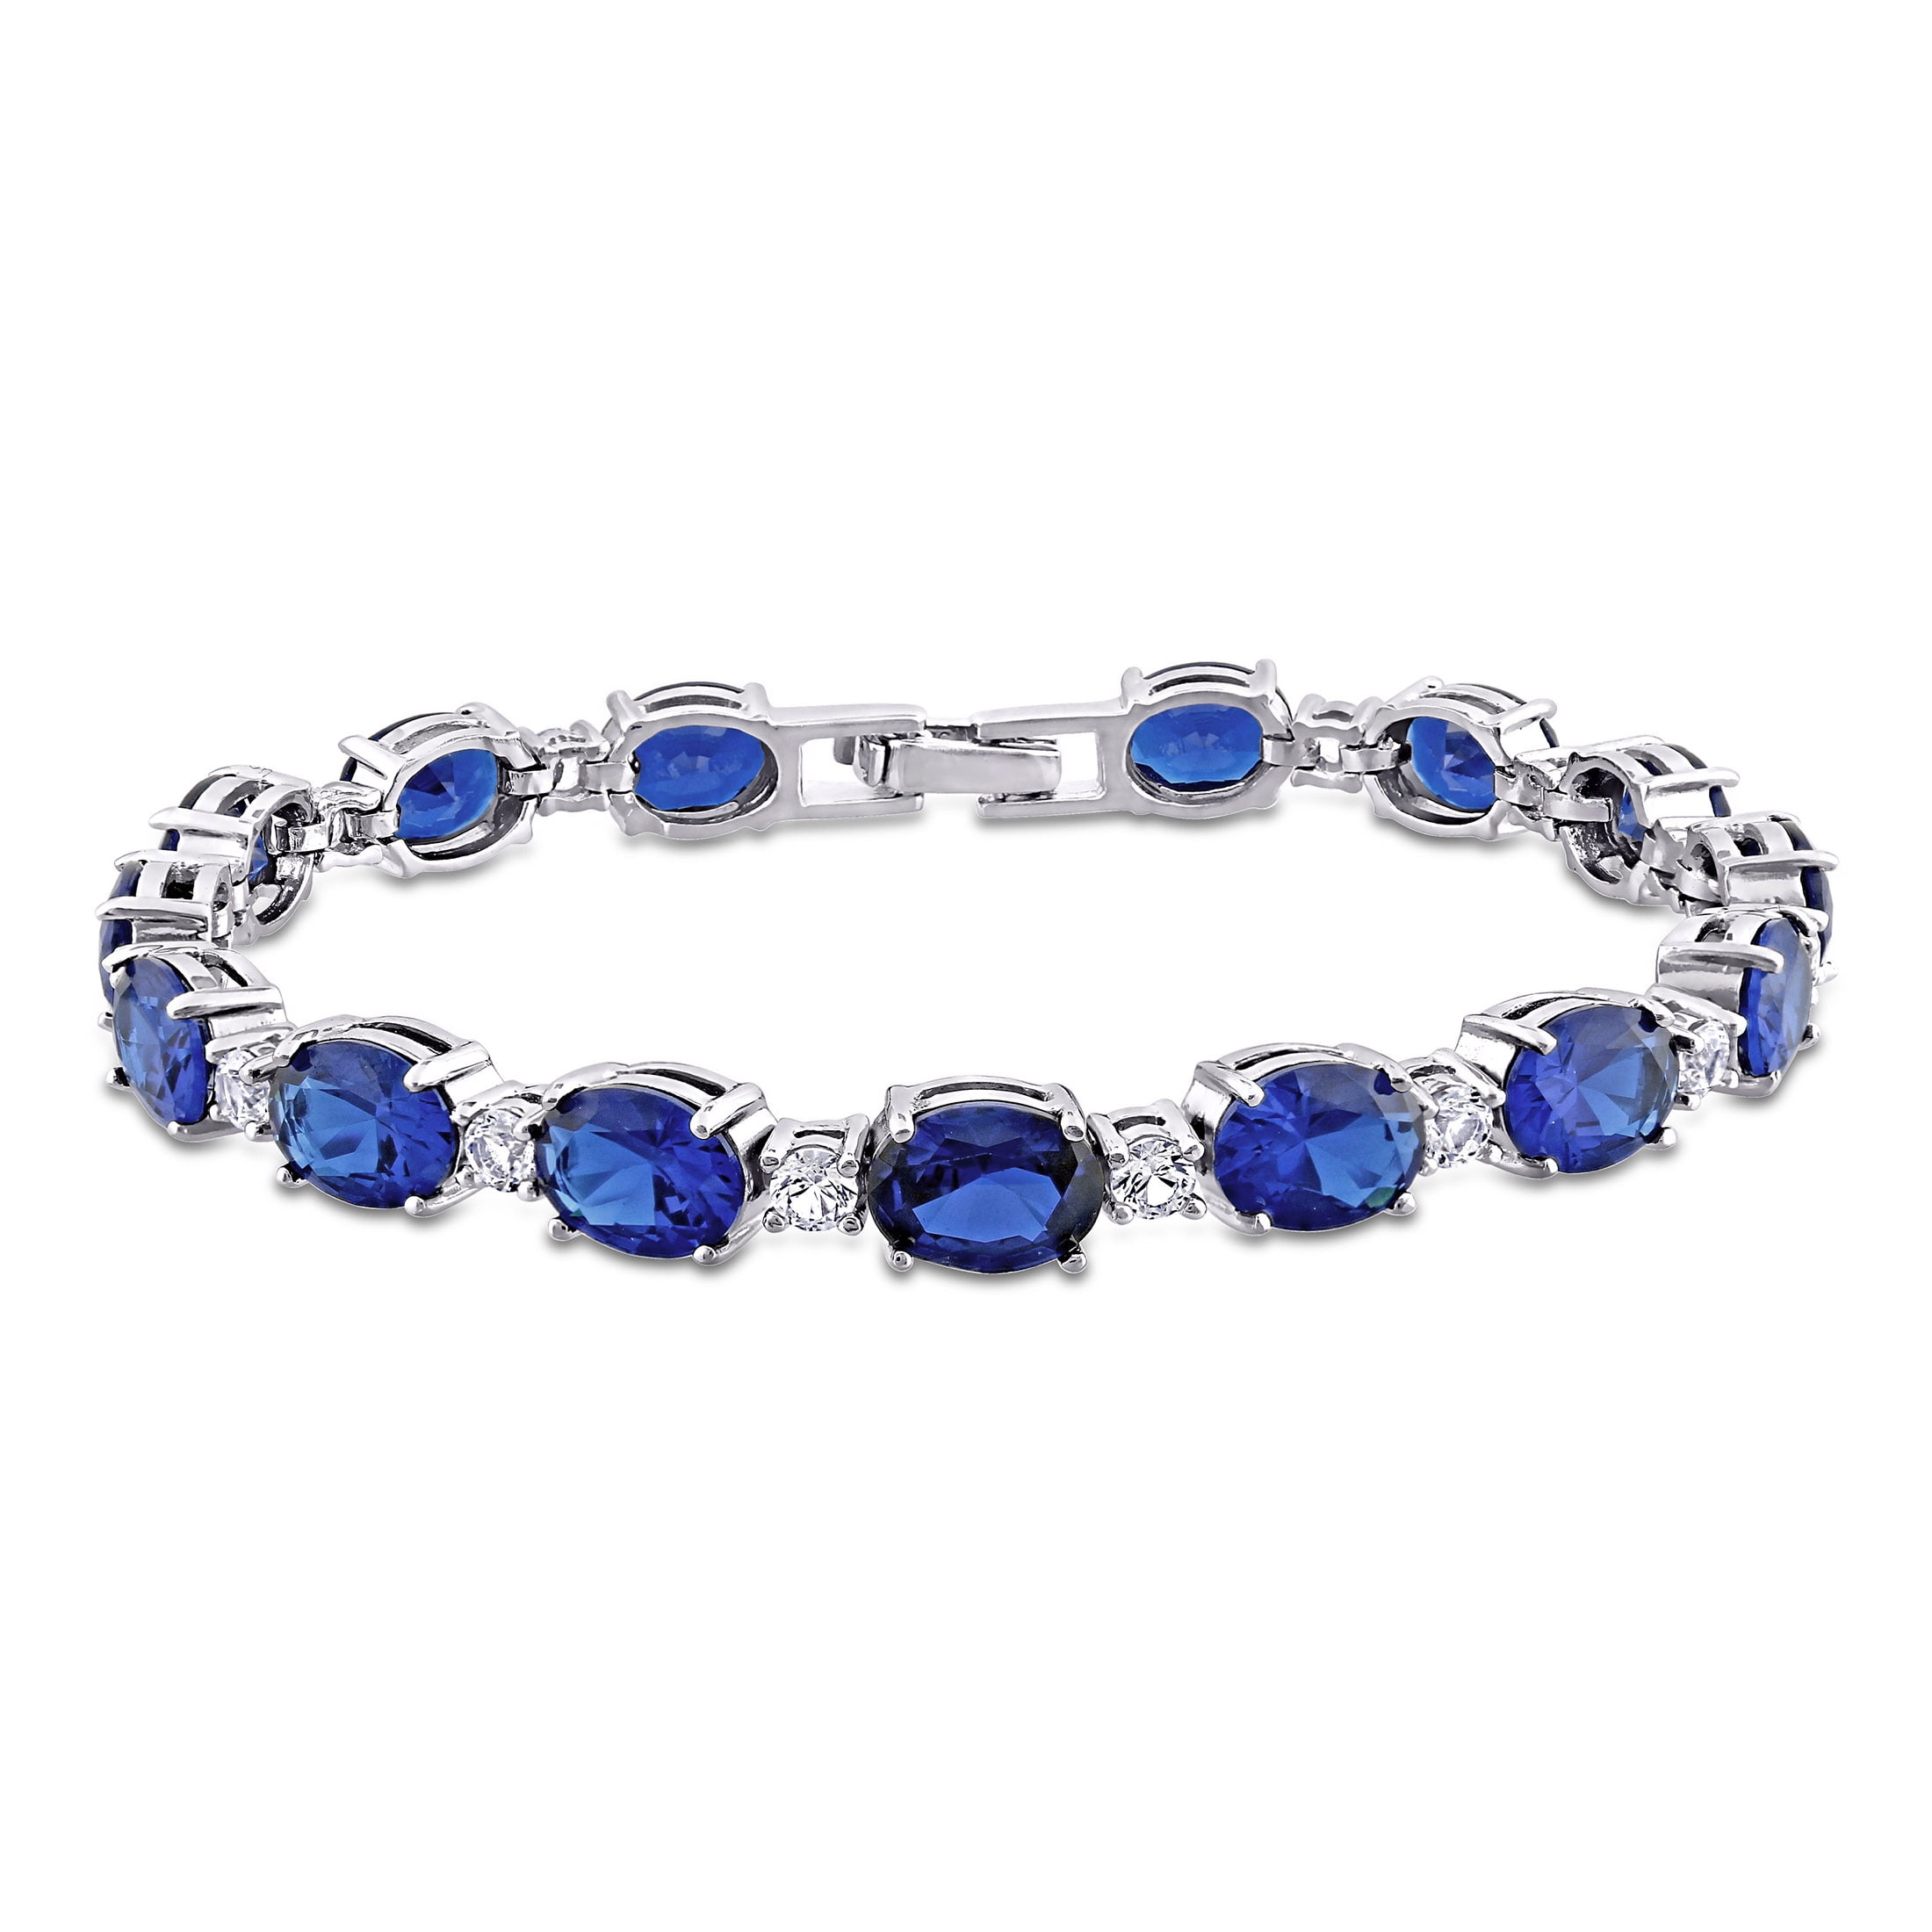 Buy Genuine Blue Sapphire 5 Stone Halo Diana Style Silver Bracelet Online  in India - Etsy